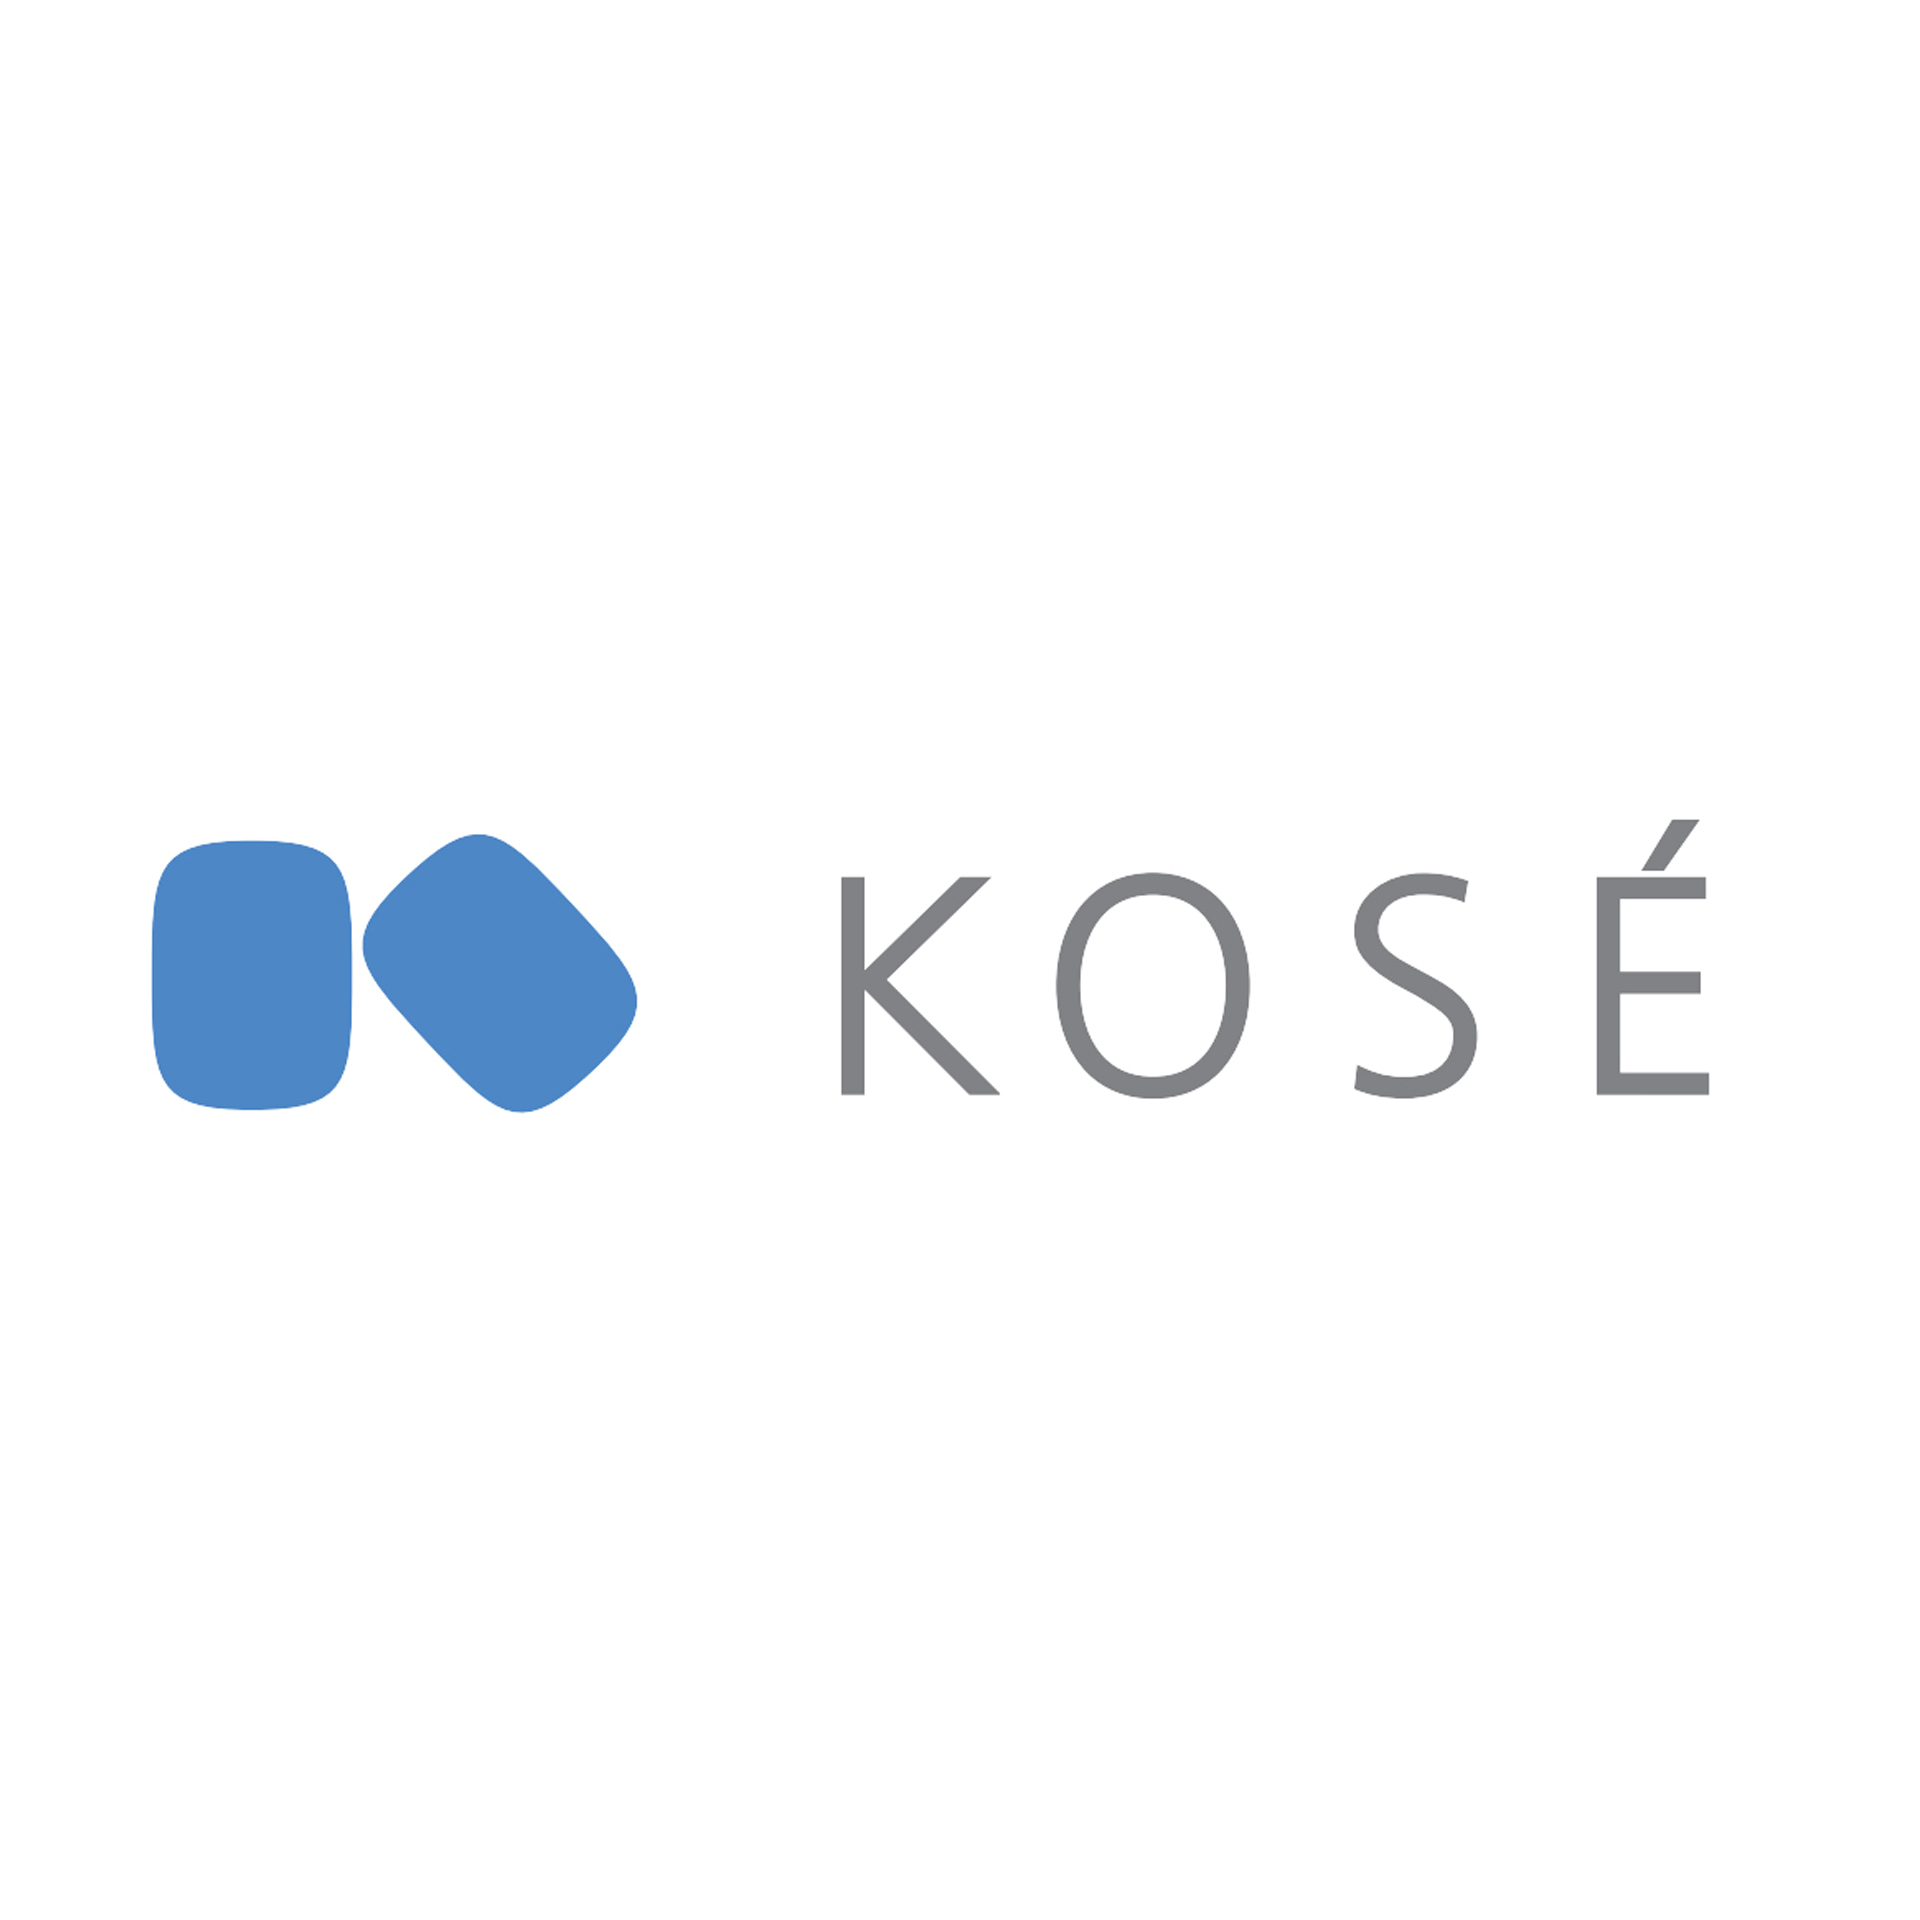 See the The excellence of KOSÉ enriches dermocosmetology in Lyon success story